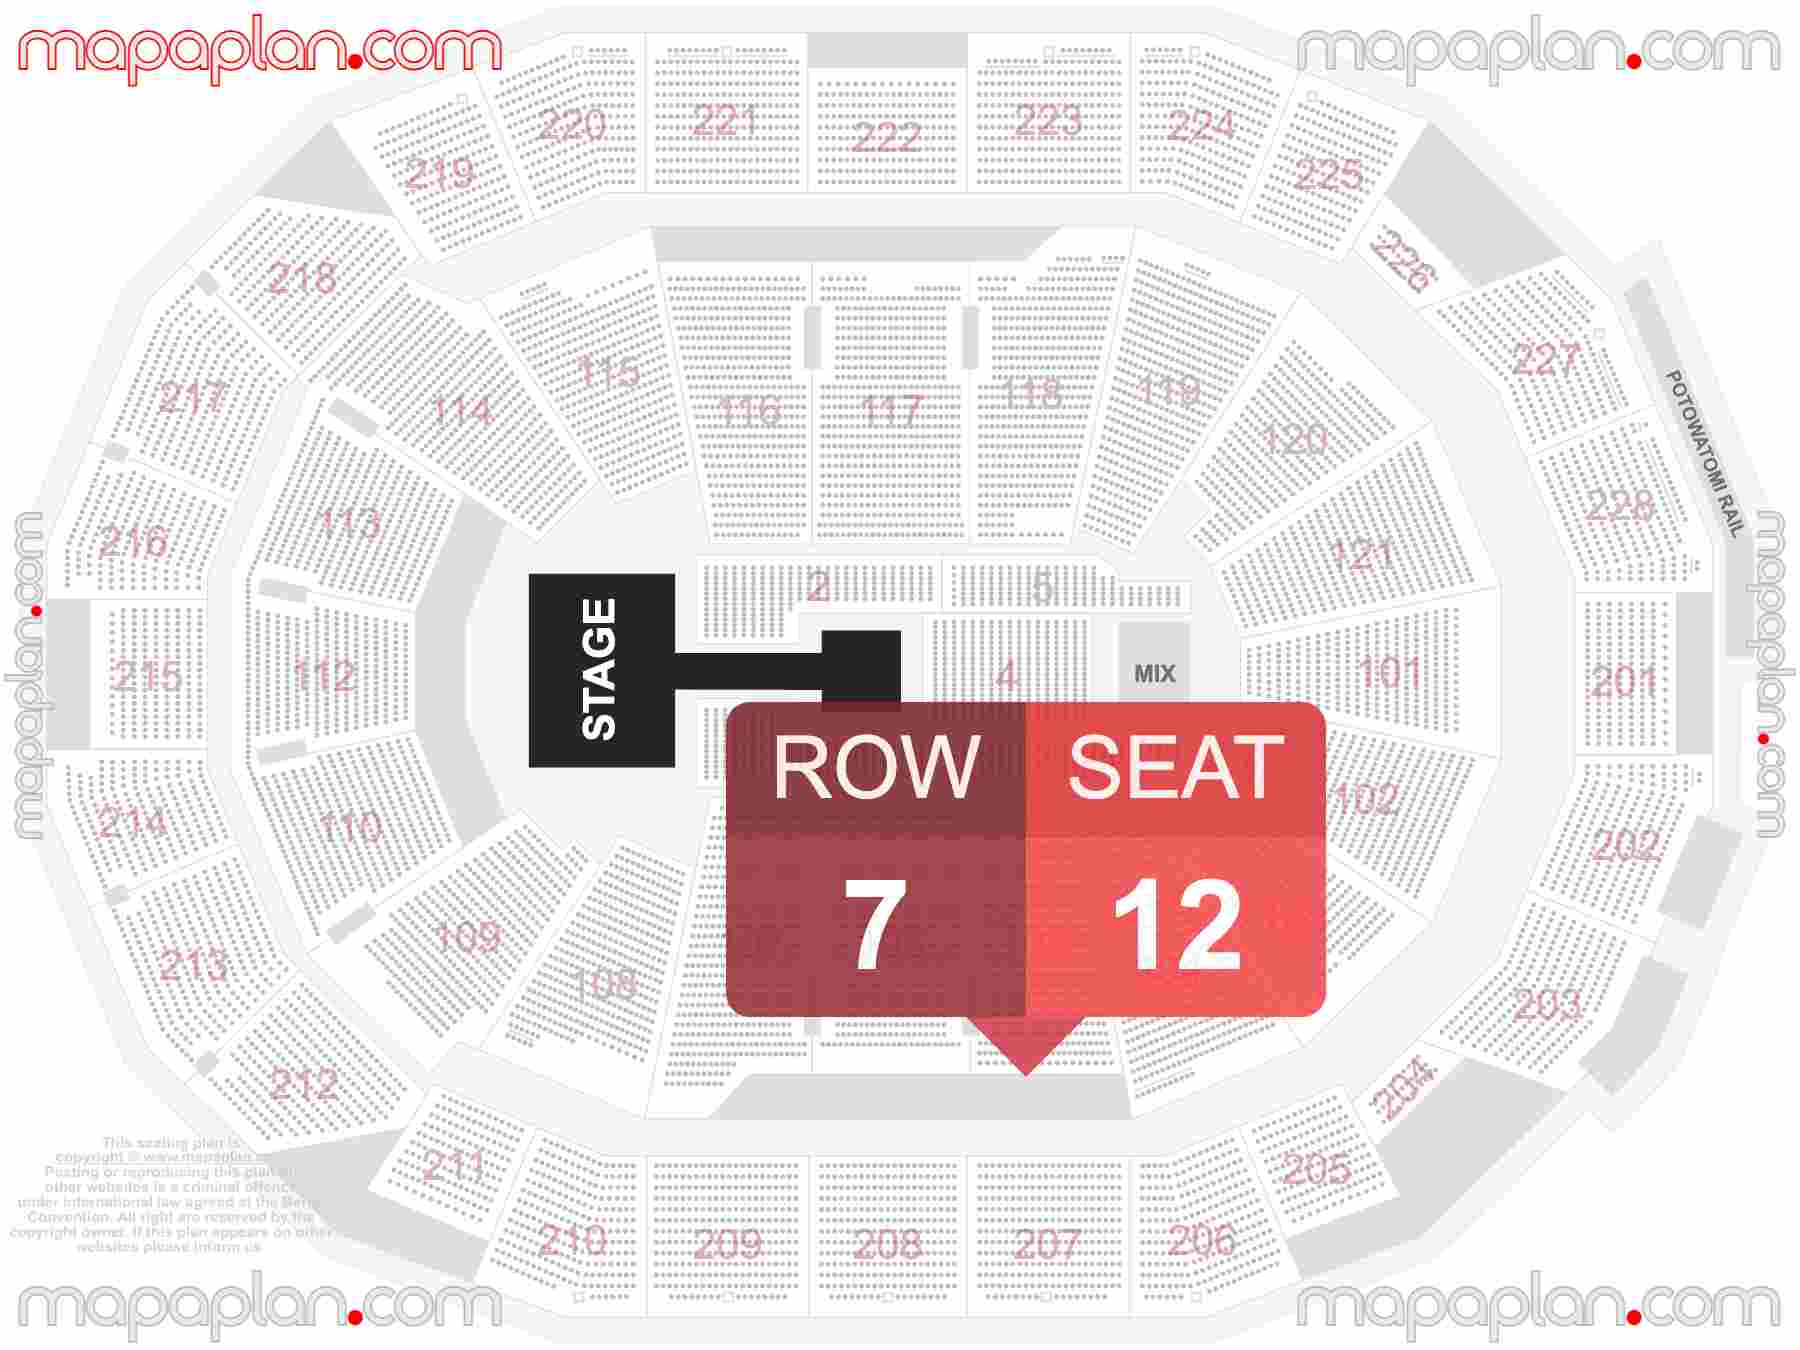 Milwaukee Fiserv Forum seating chart Catwalk extended runway concert B-stage precise seat finder - Explore seating chart with exact section, seat and row numbers